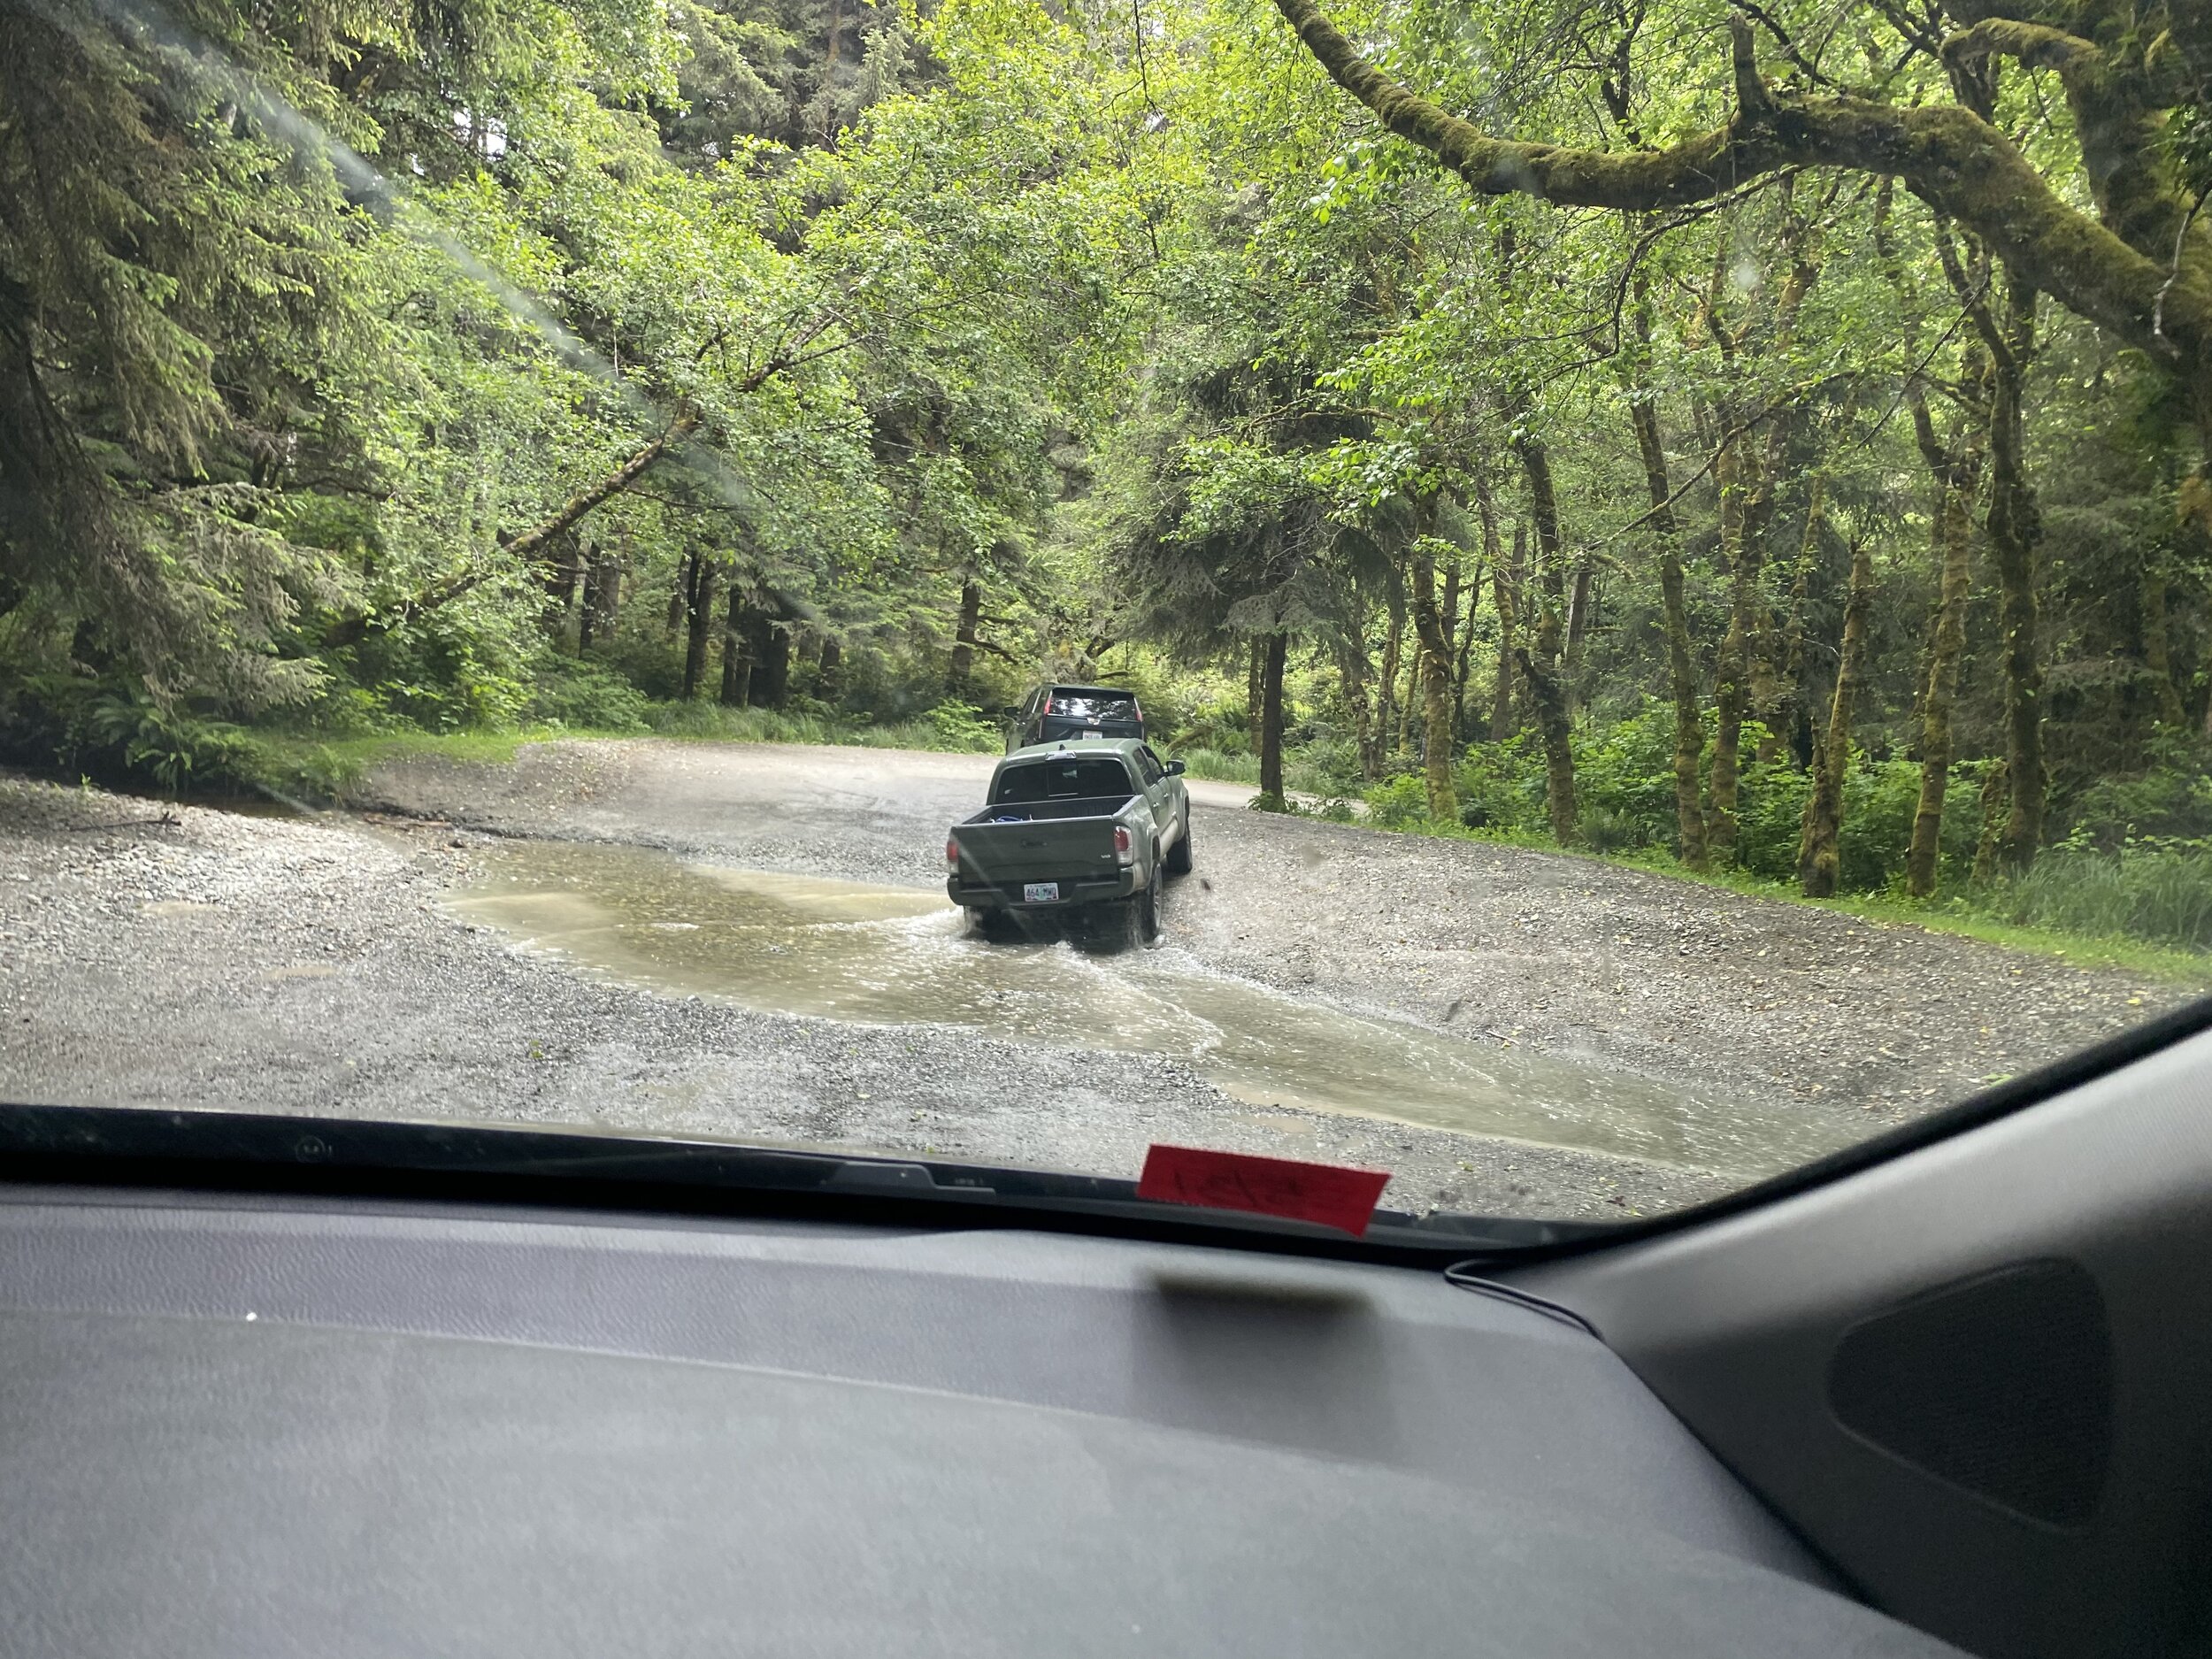 Watching the strategy of cars ahead of us to see the best angle to cross one of the water crossings on the road to Fern Canyon.  Photo by Karen Boudreaux, June 12, 2021